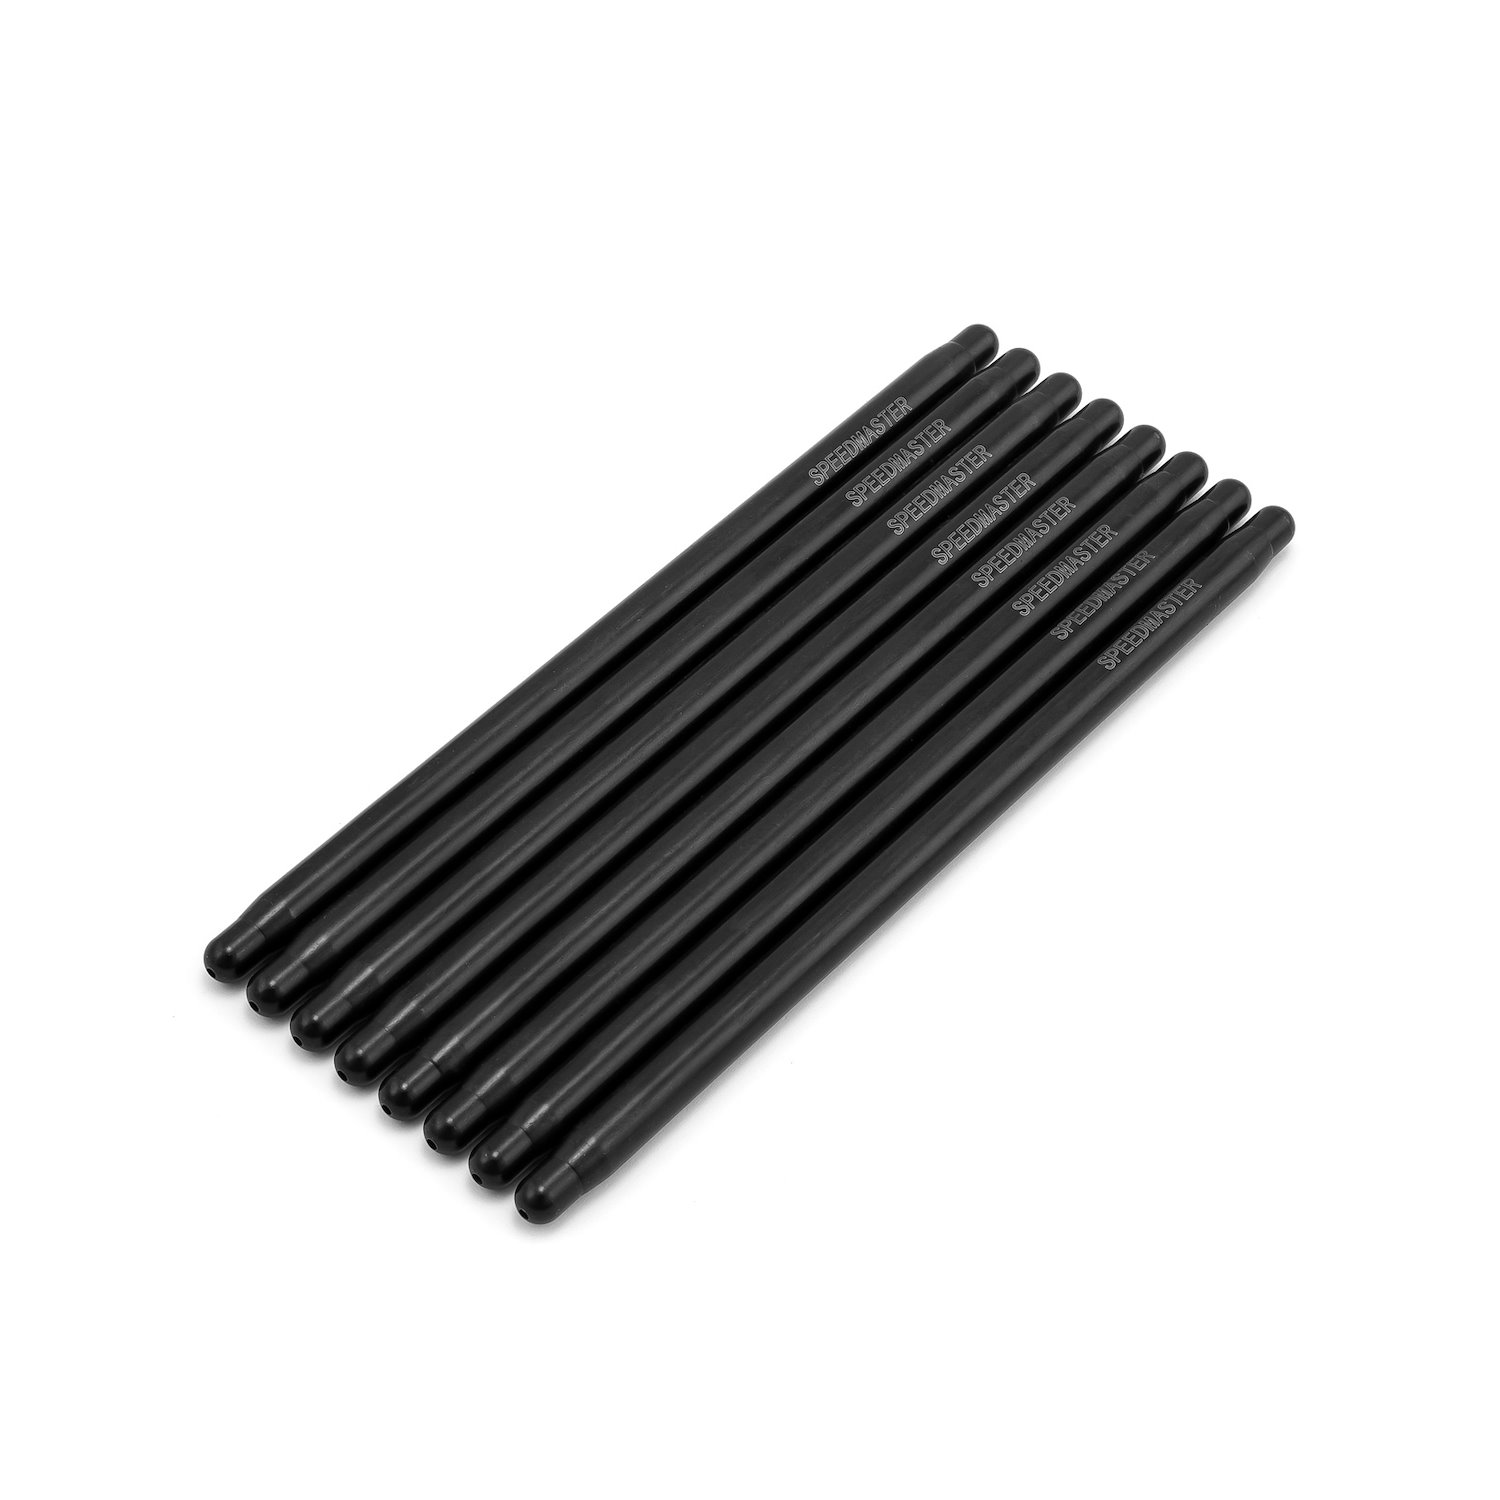 1-254-032 8.550 in. Chromoly Heat-Treated 3/8 in. 0.080 in. Wall DNA One-Piece Pushrods